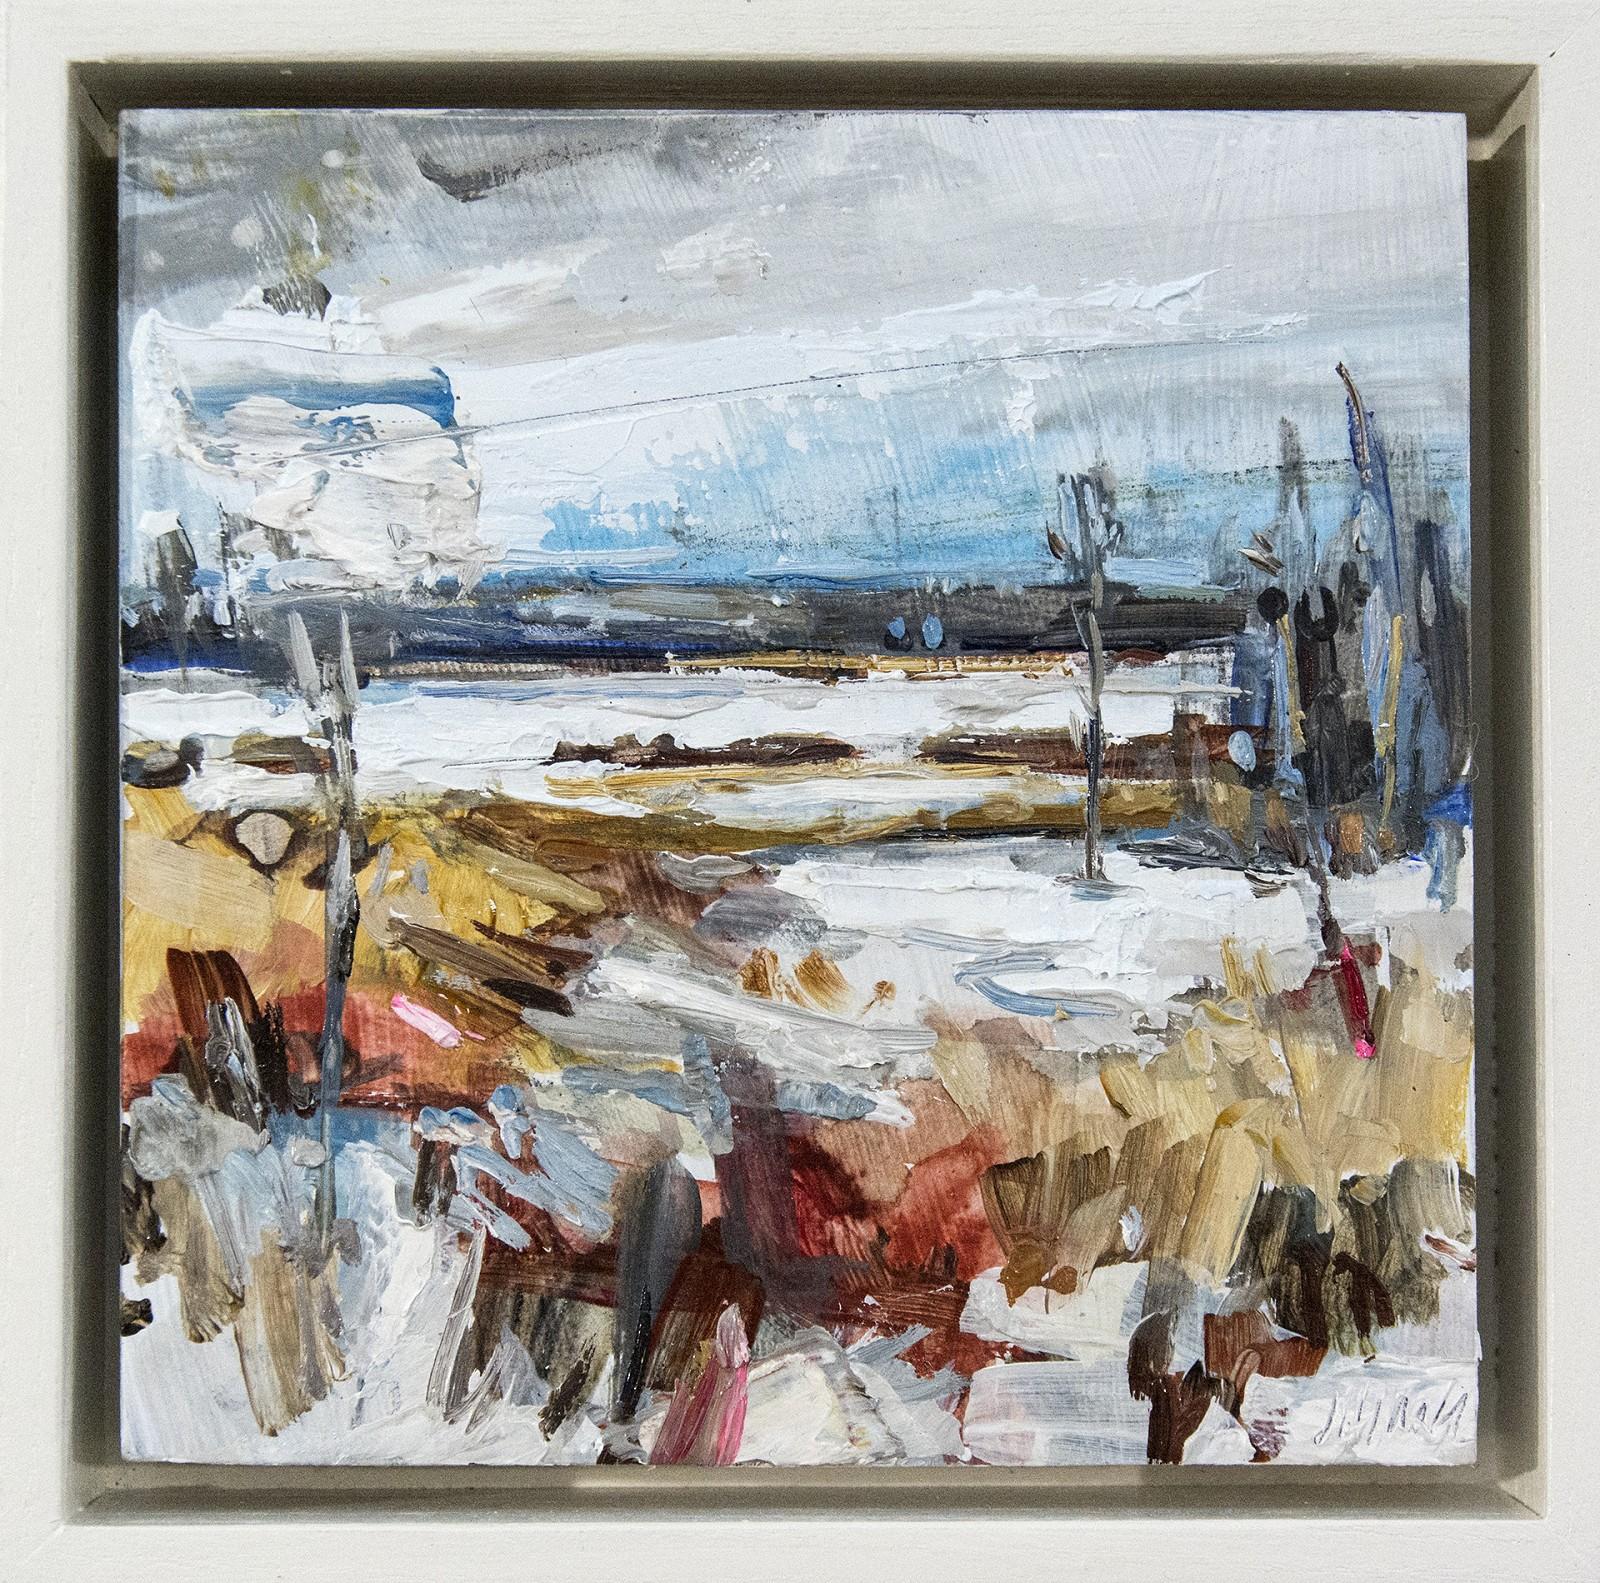 Winter's Myth - small, vibrant, gestural landscape, oil and acrylic on canvas